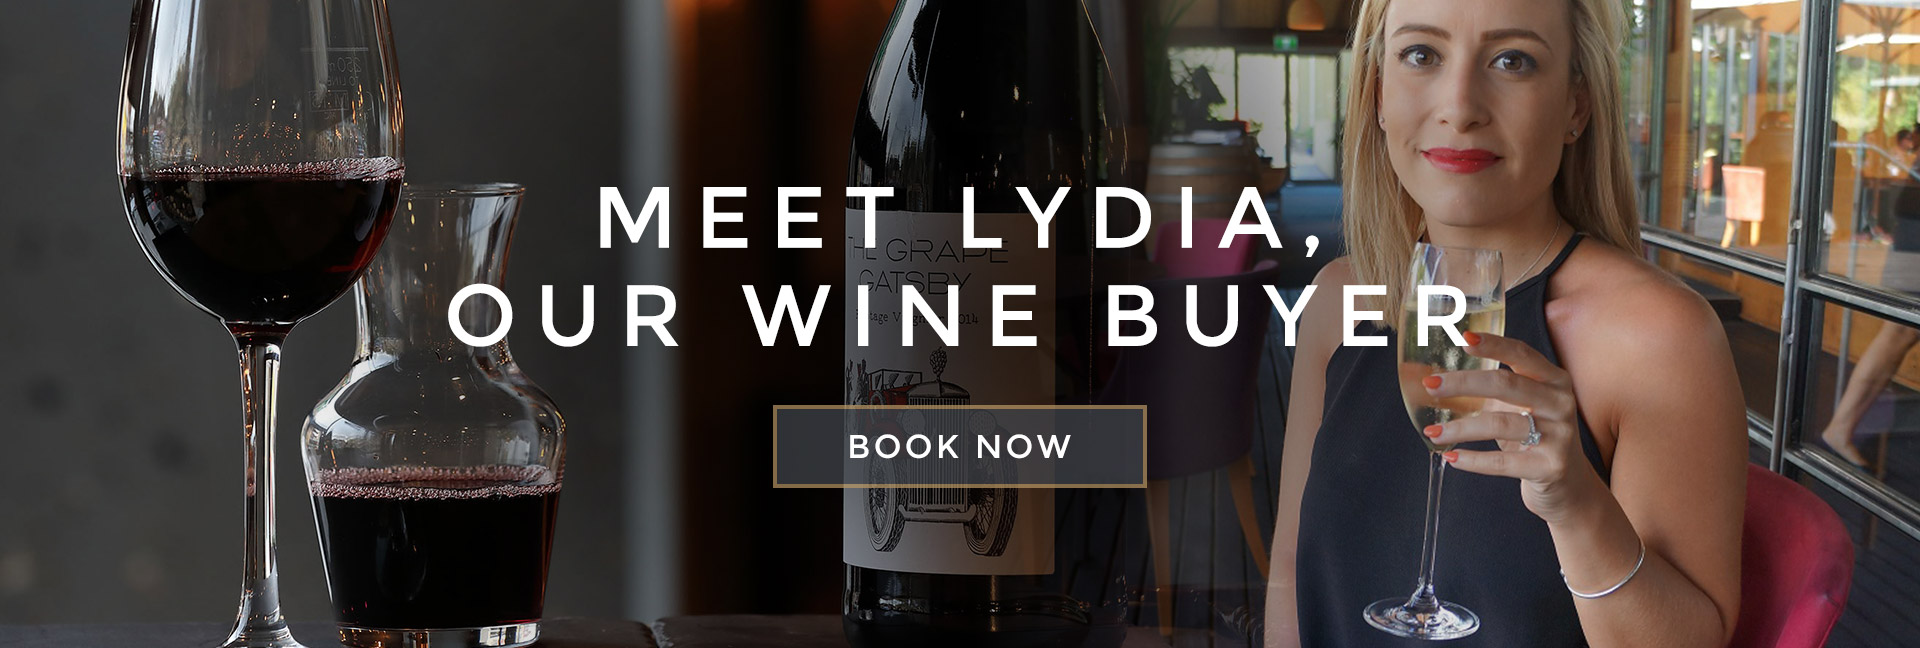 Meet Lydia, our wine buyer at ABO Virtual